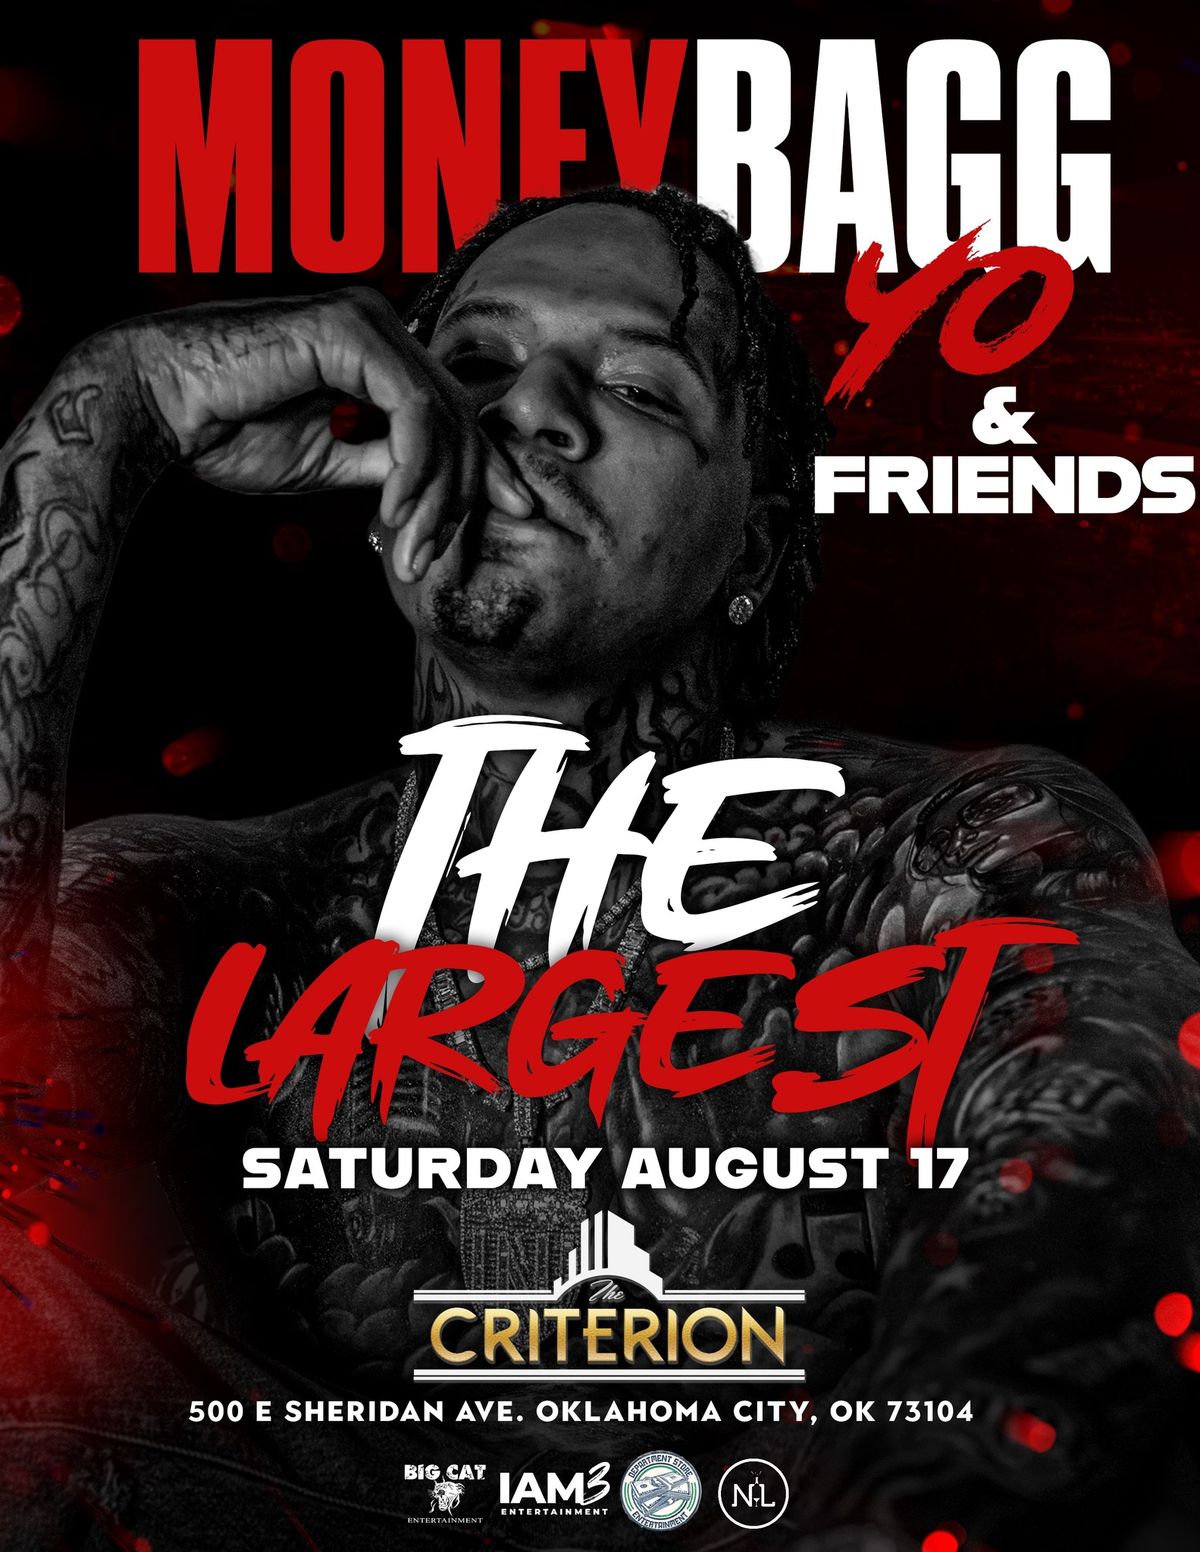 Moneybagg Yo | The Largest